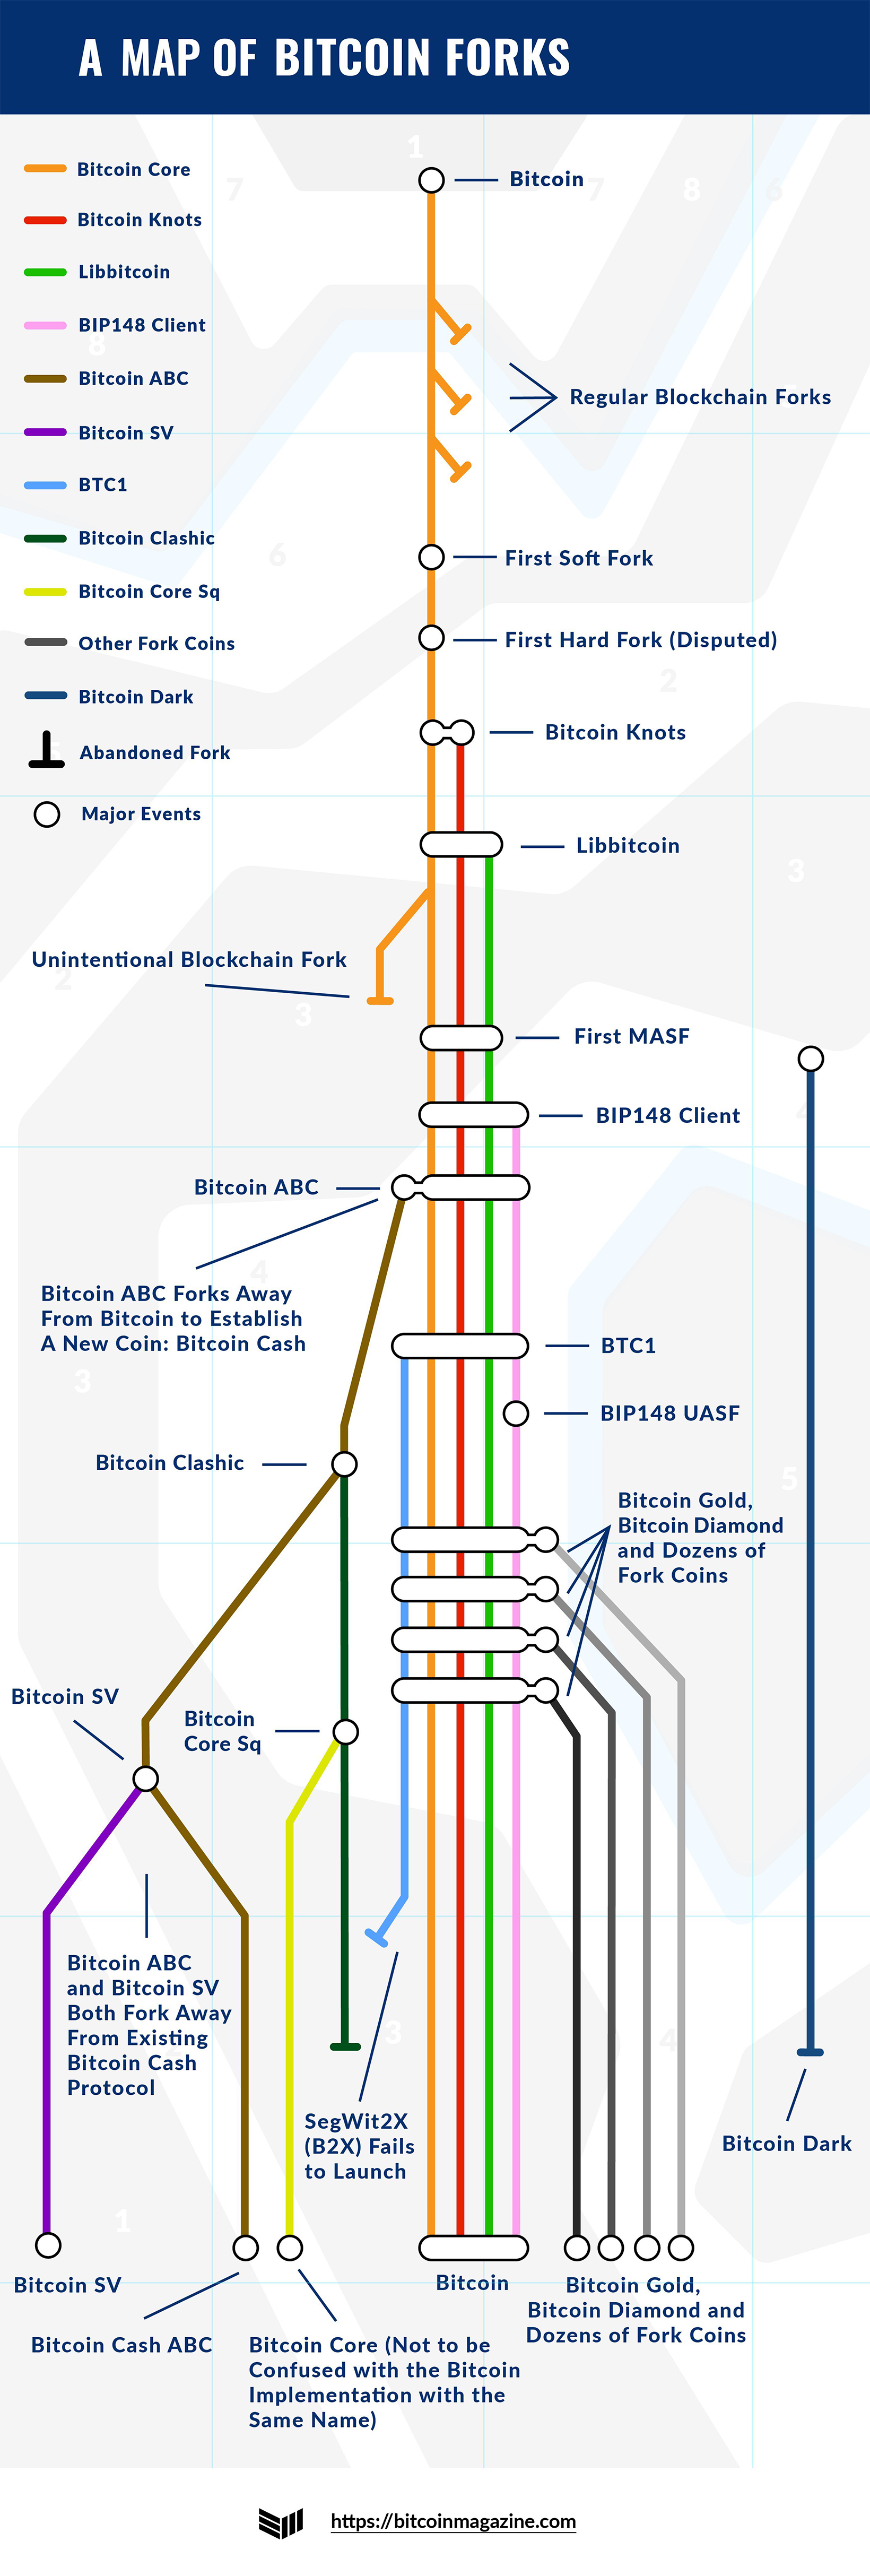 Mapping Out the Major Bitcoin Forks